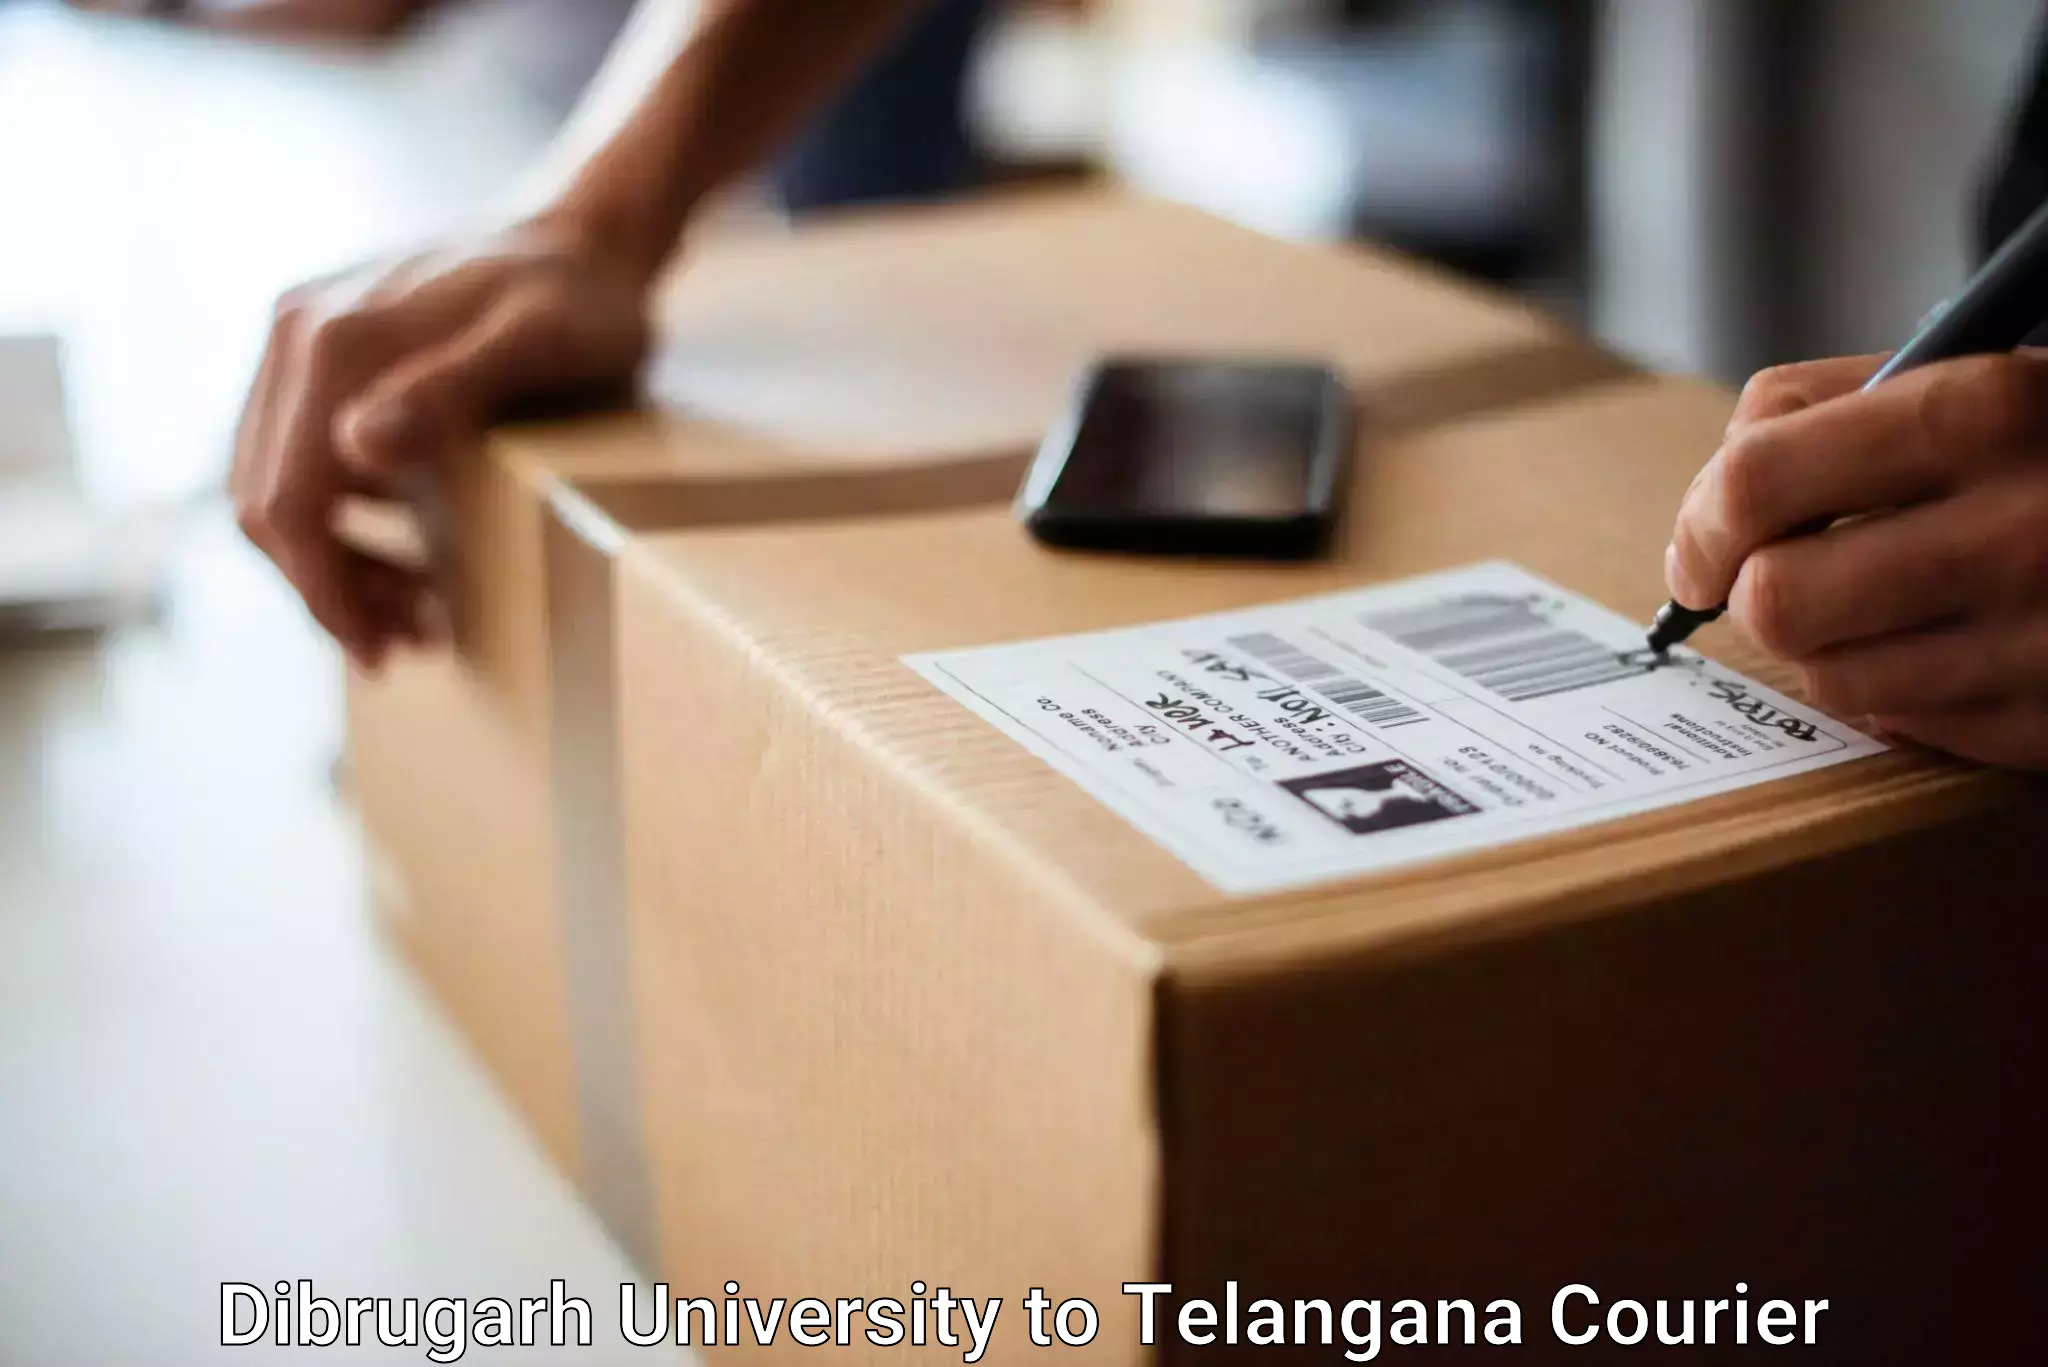 Professional baggage delivery in Dibrugarh University to Bhadrachalam